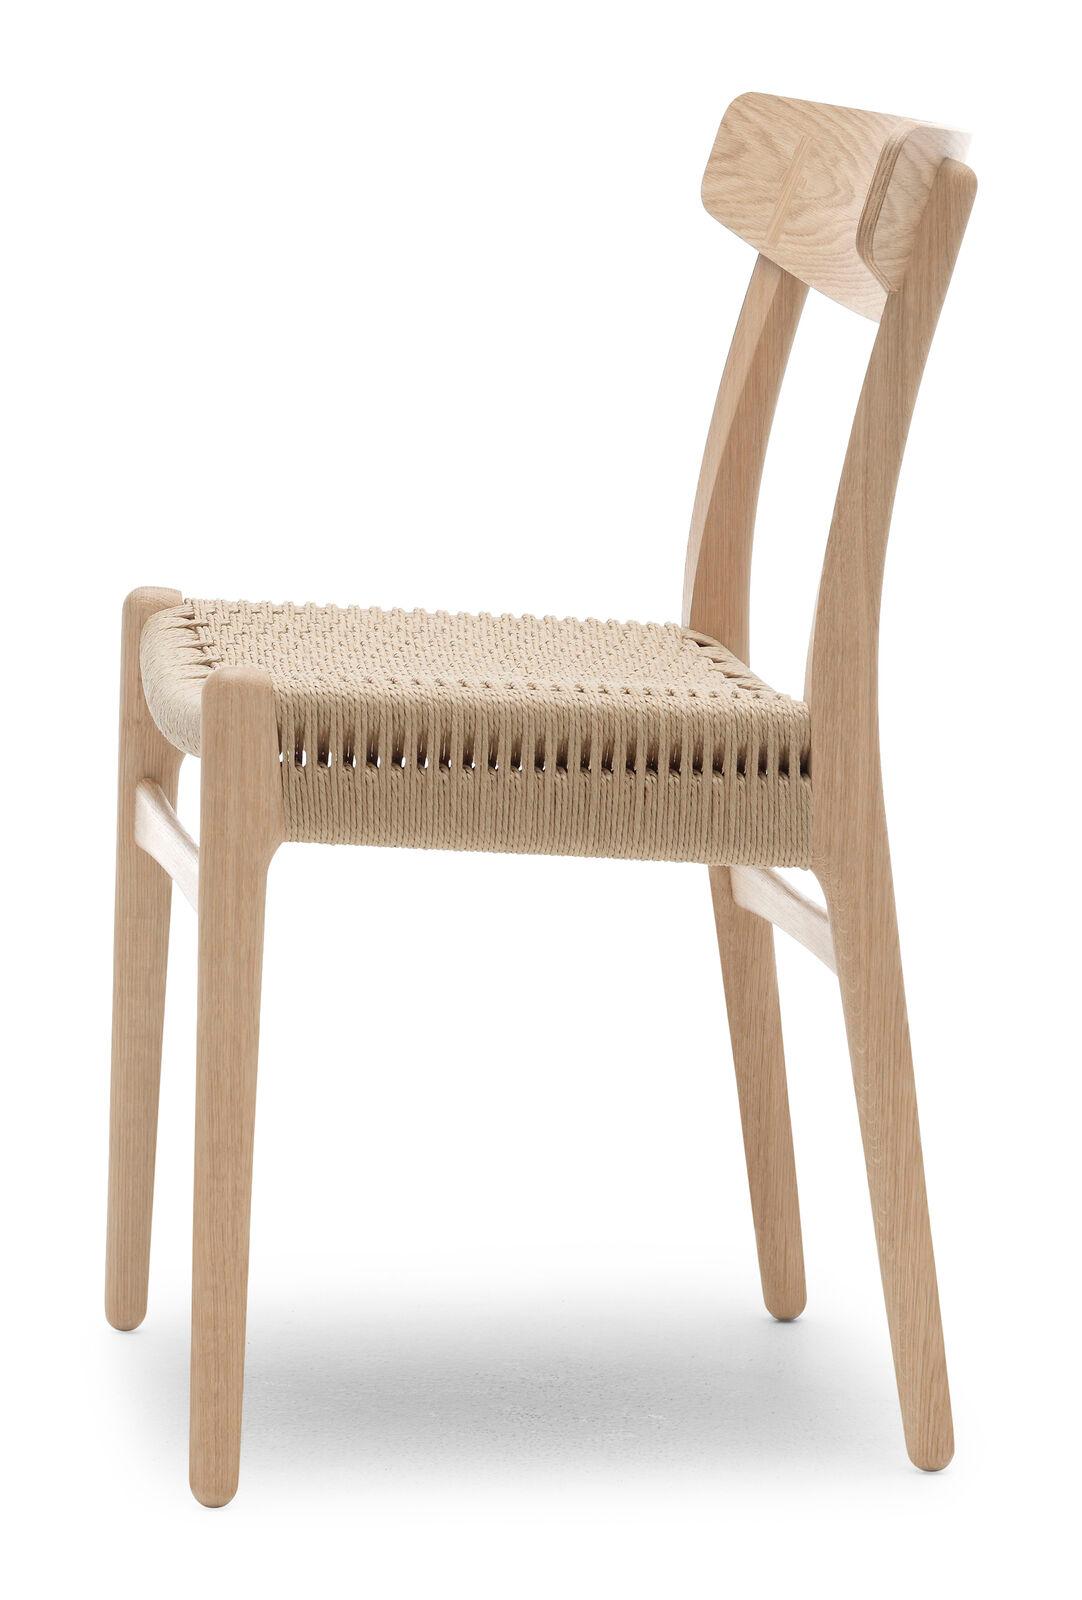 First introduced in 1950, the CH23 dining chair features clean, organic contours and refined styling, demonstrating young Hans J. Wegner’s unique design approach and insightful craftsmanship.